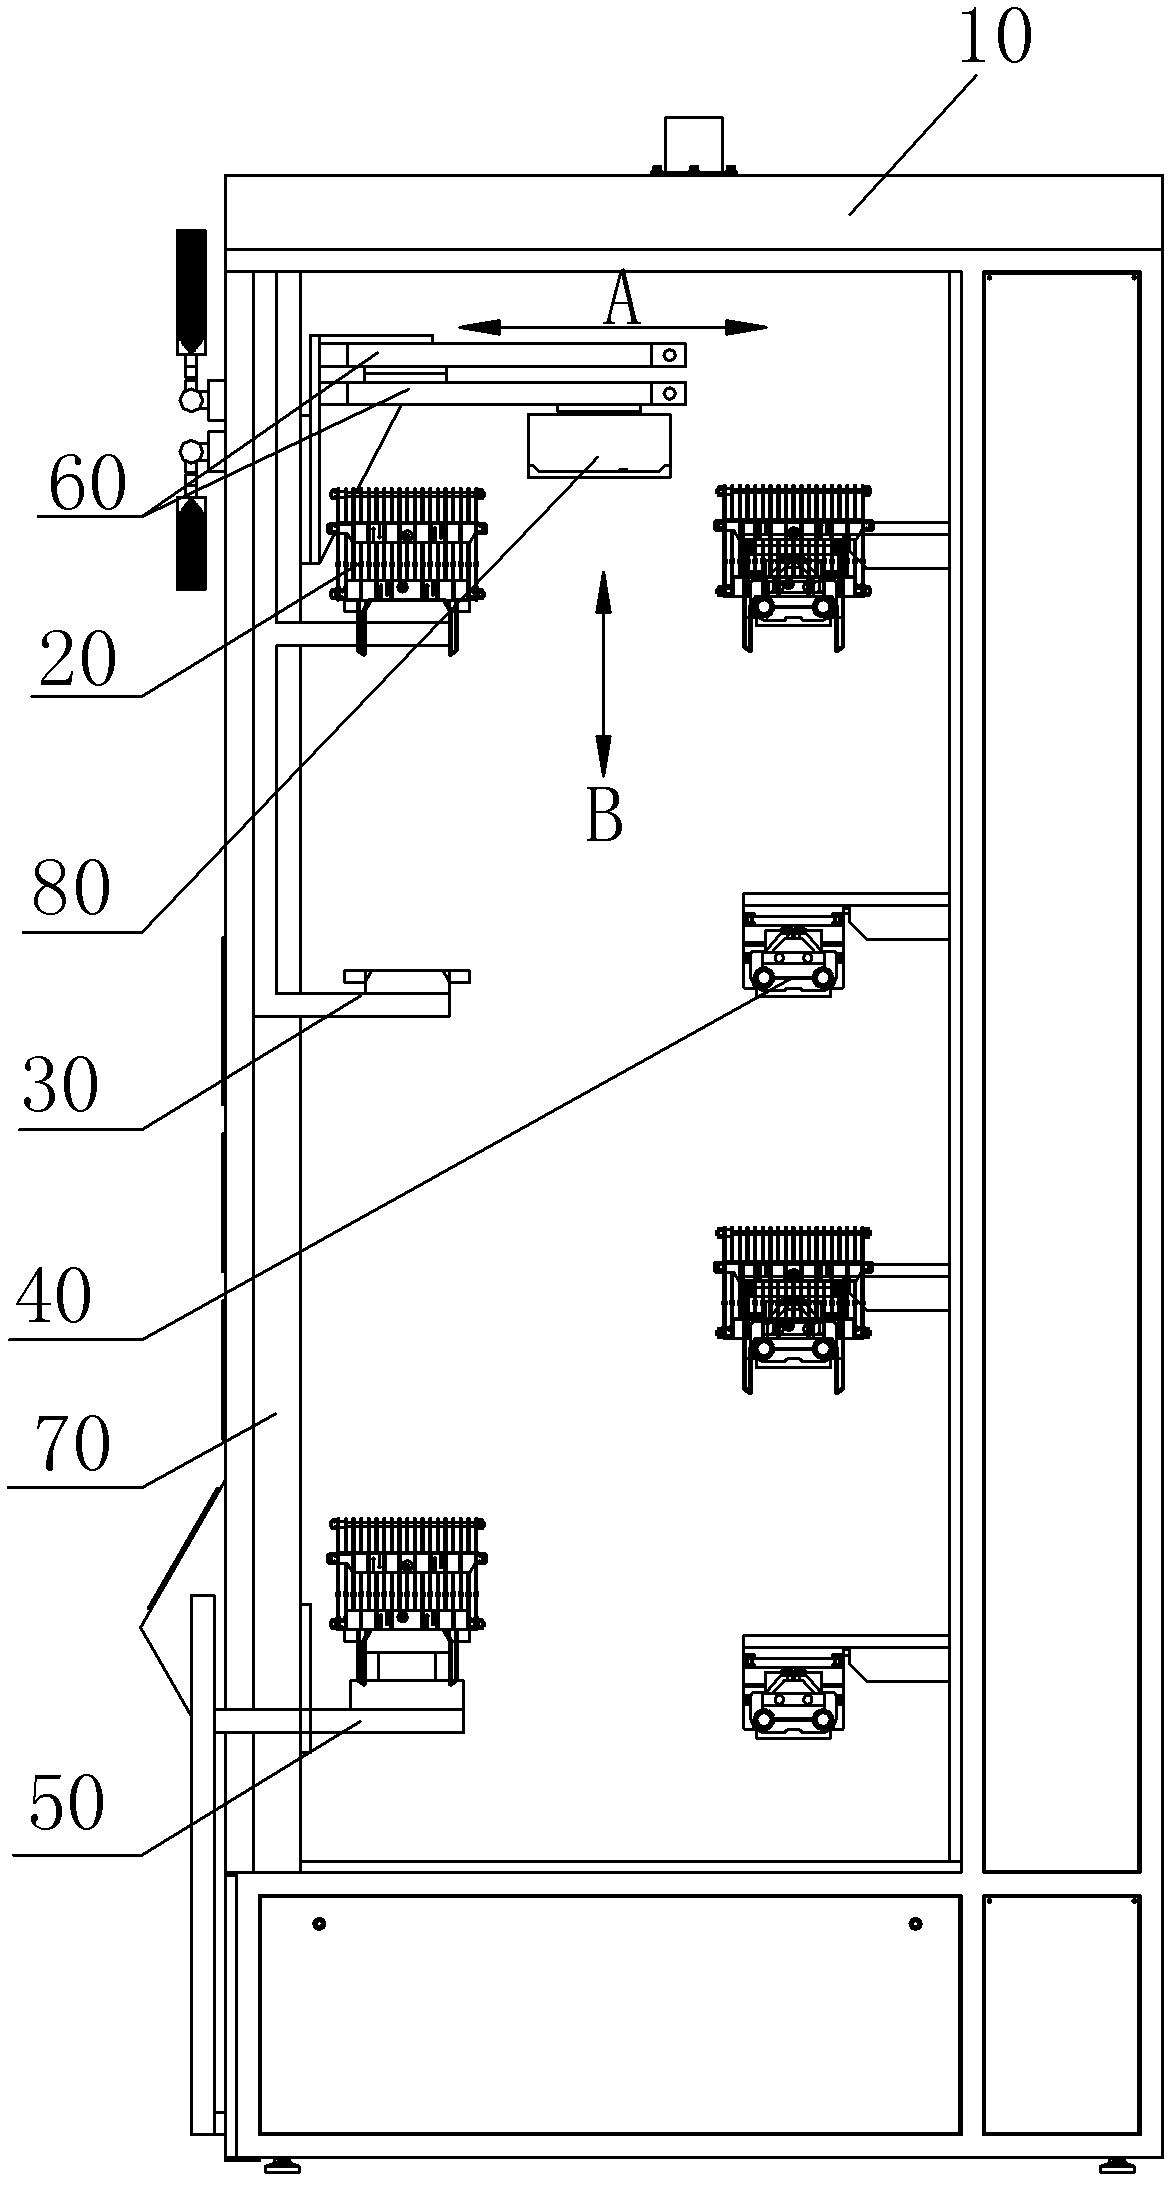 Automatic loading and unloading device for PECVD (plasma enhanced chemical vapor deposition) equipment